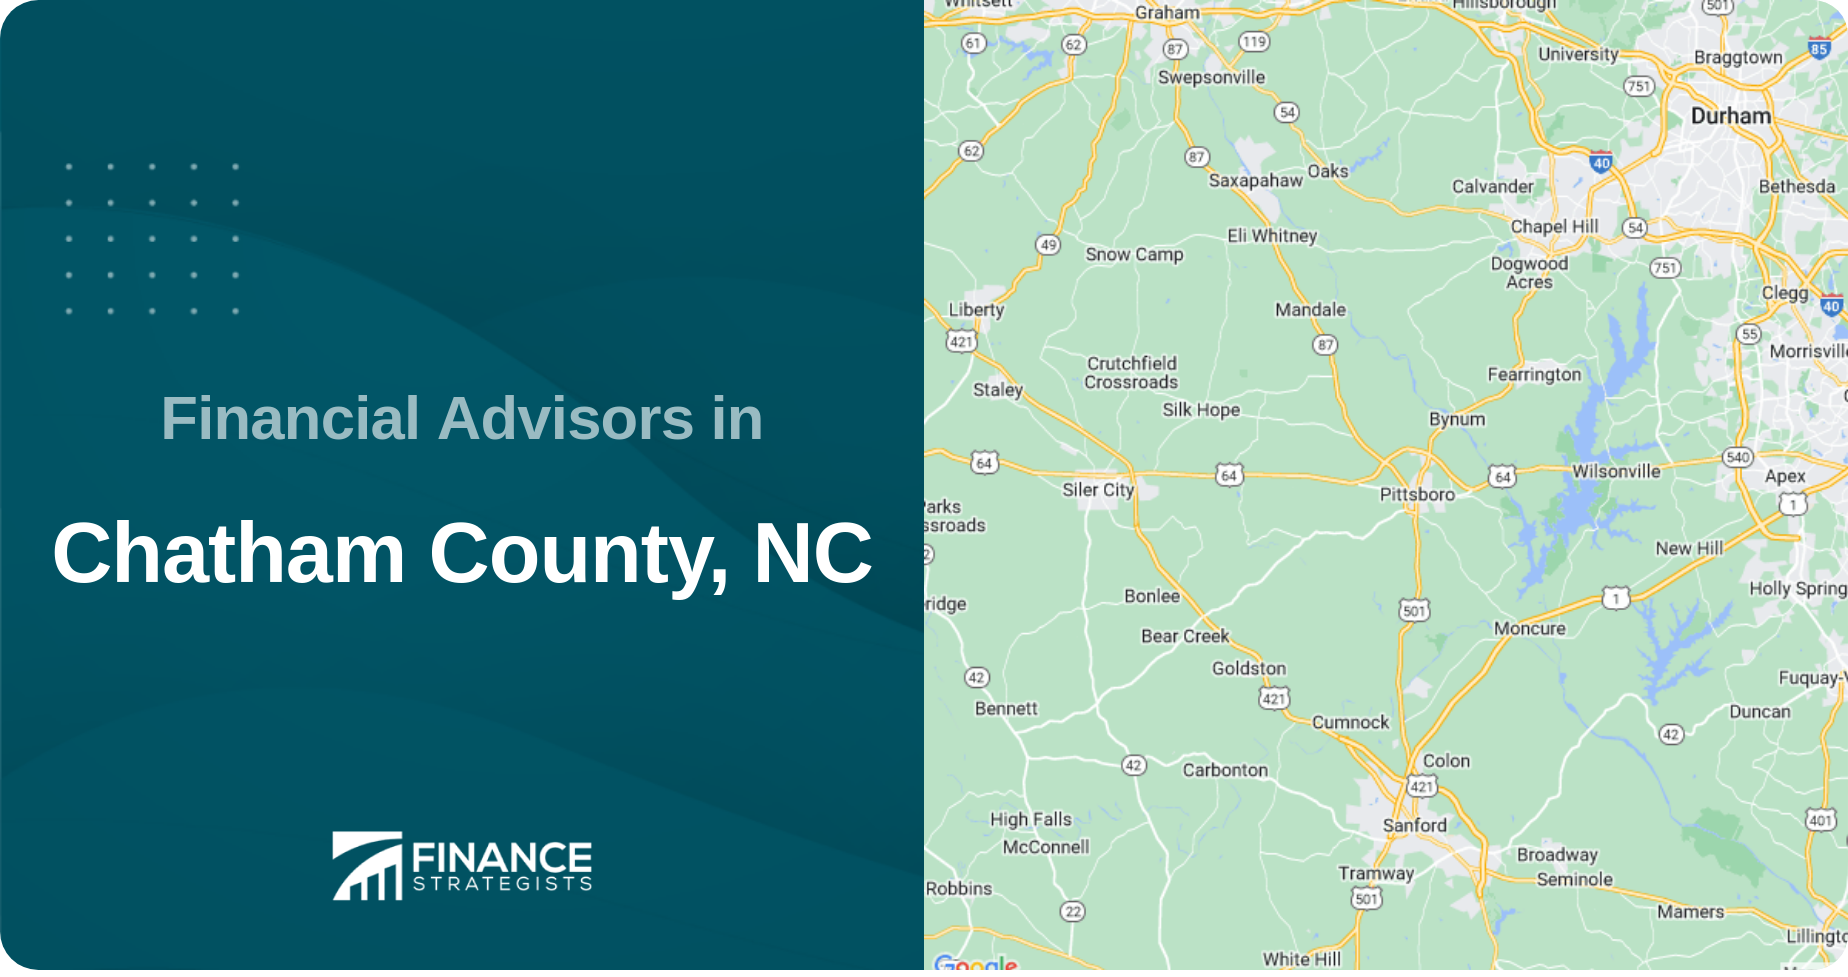 Financial Advisors in Chatham County, NC